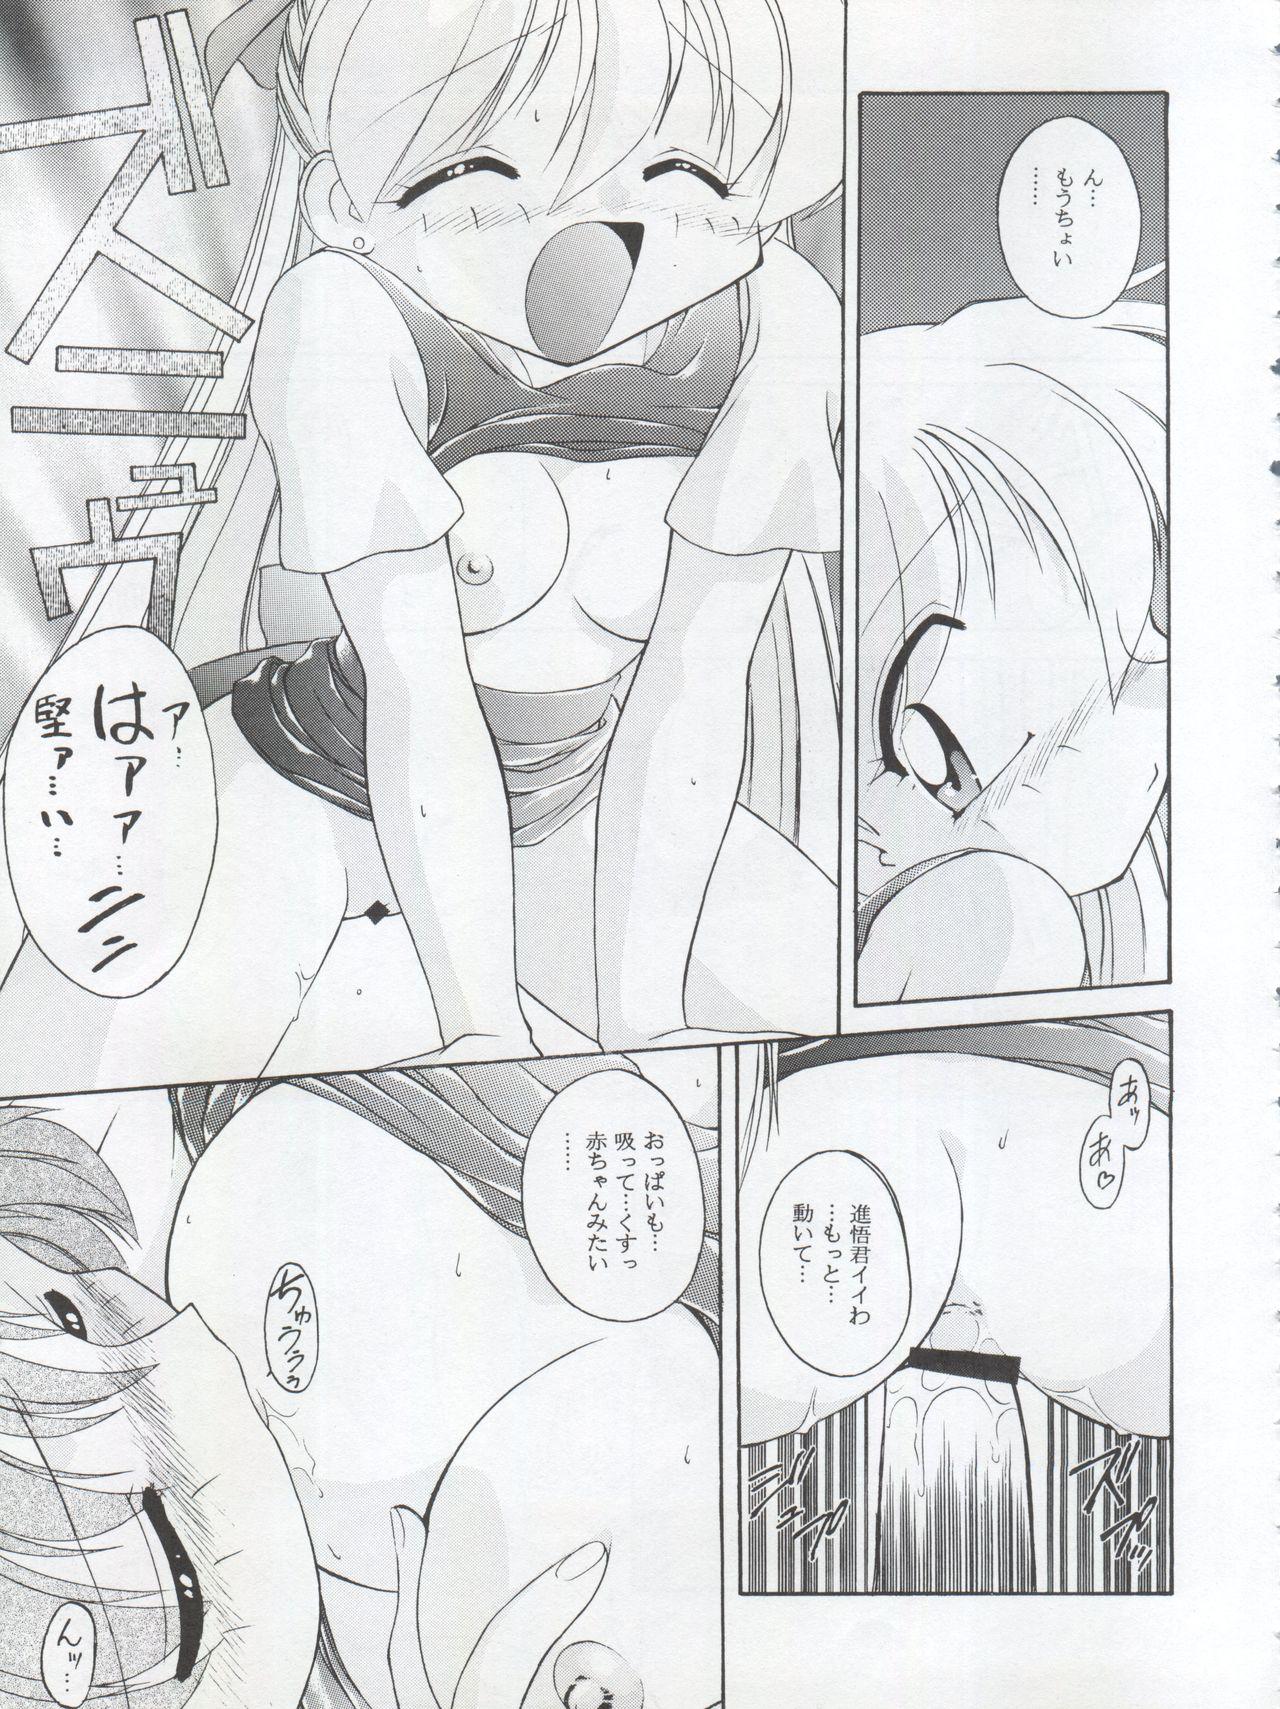 Booty HABER 8 - Sailor moon Gag - Page 11